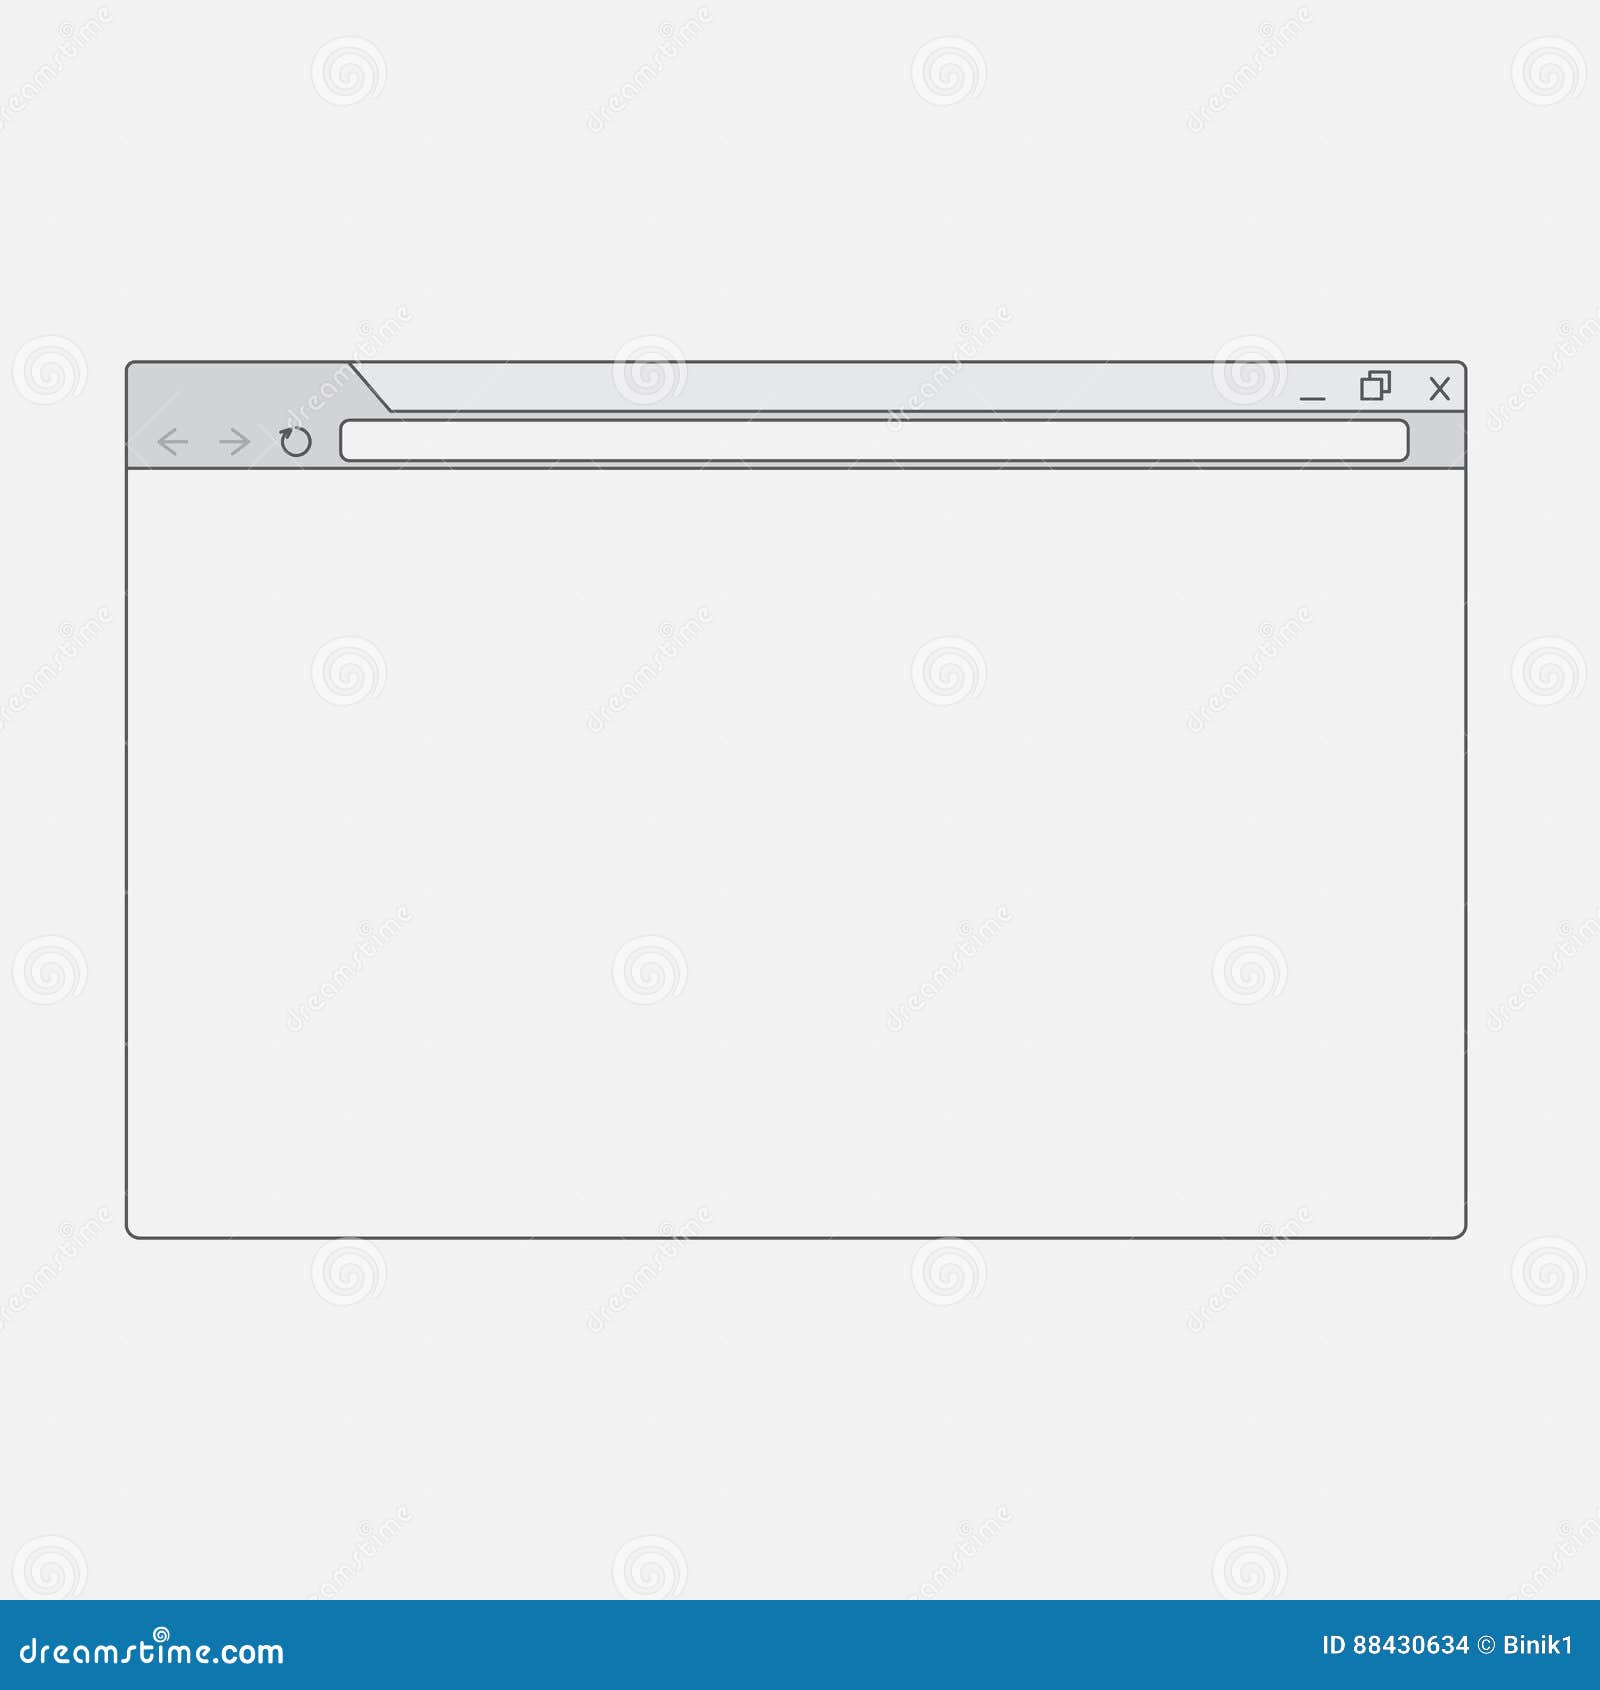 vb.net How to keep gui functional while webbrowser is navigating-VBForums